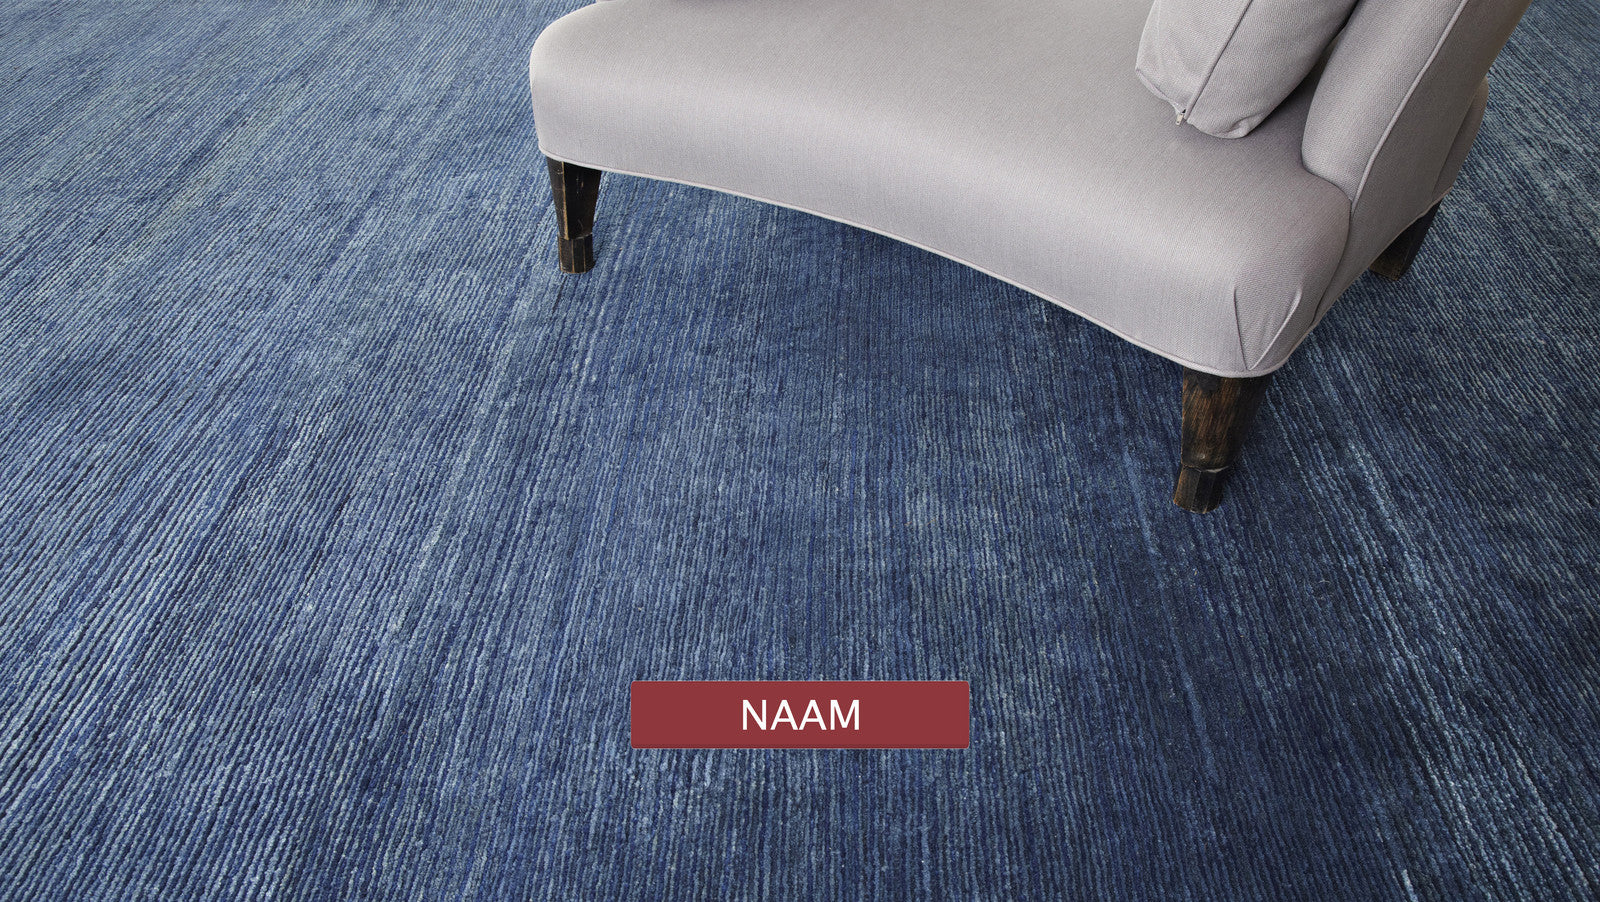 Naam is a museum quality rug handmade with handcarded himalayan wool and indigo vegetable dyes